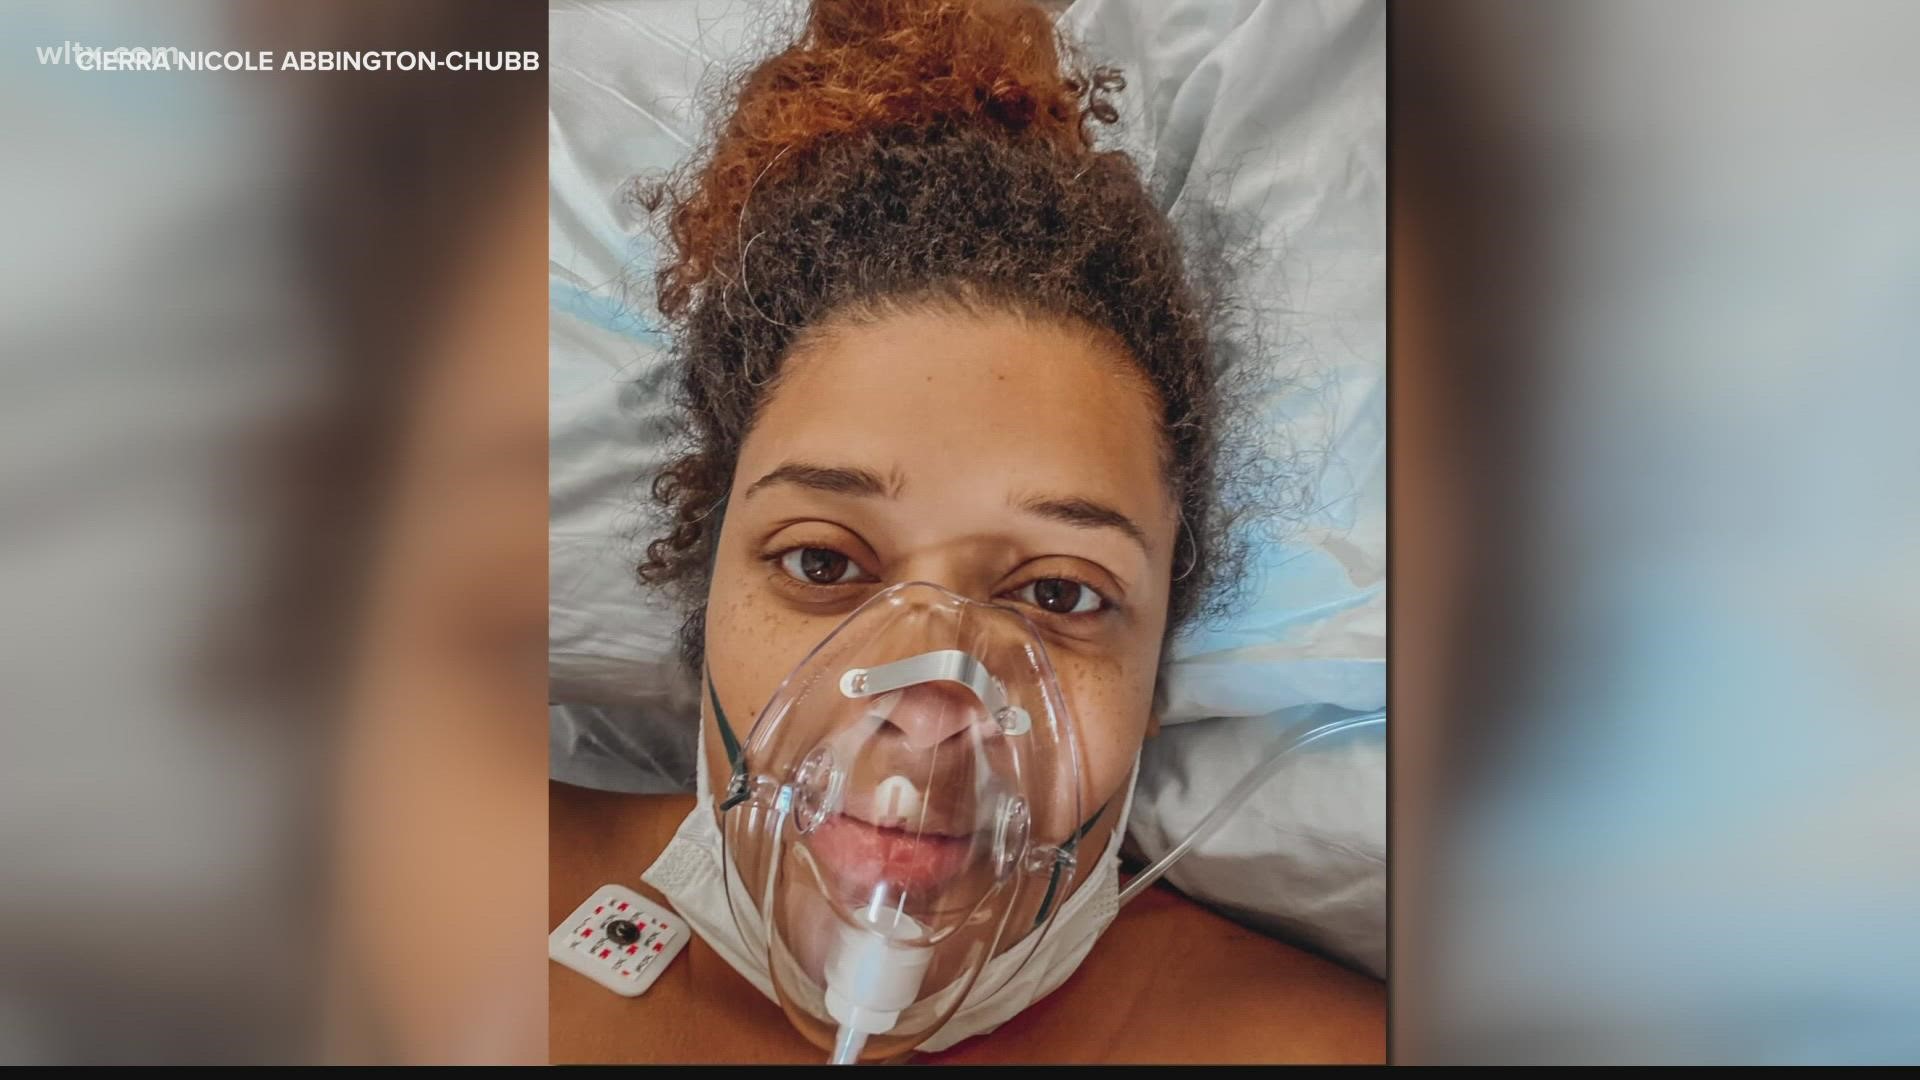 After Cierra Chubb gave birth to Myles two weeks early in July, she was placed on a ventilator until she eventually started breathing on her own.